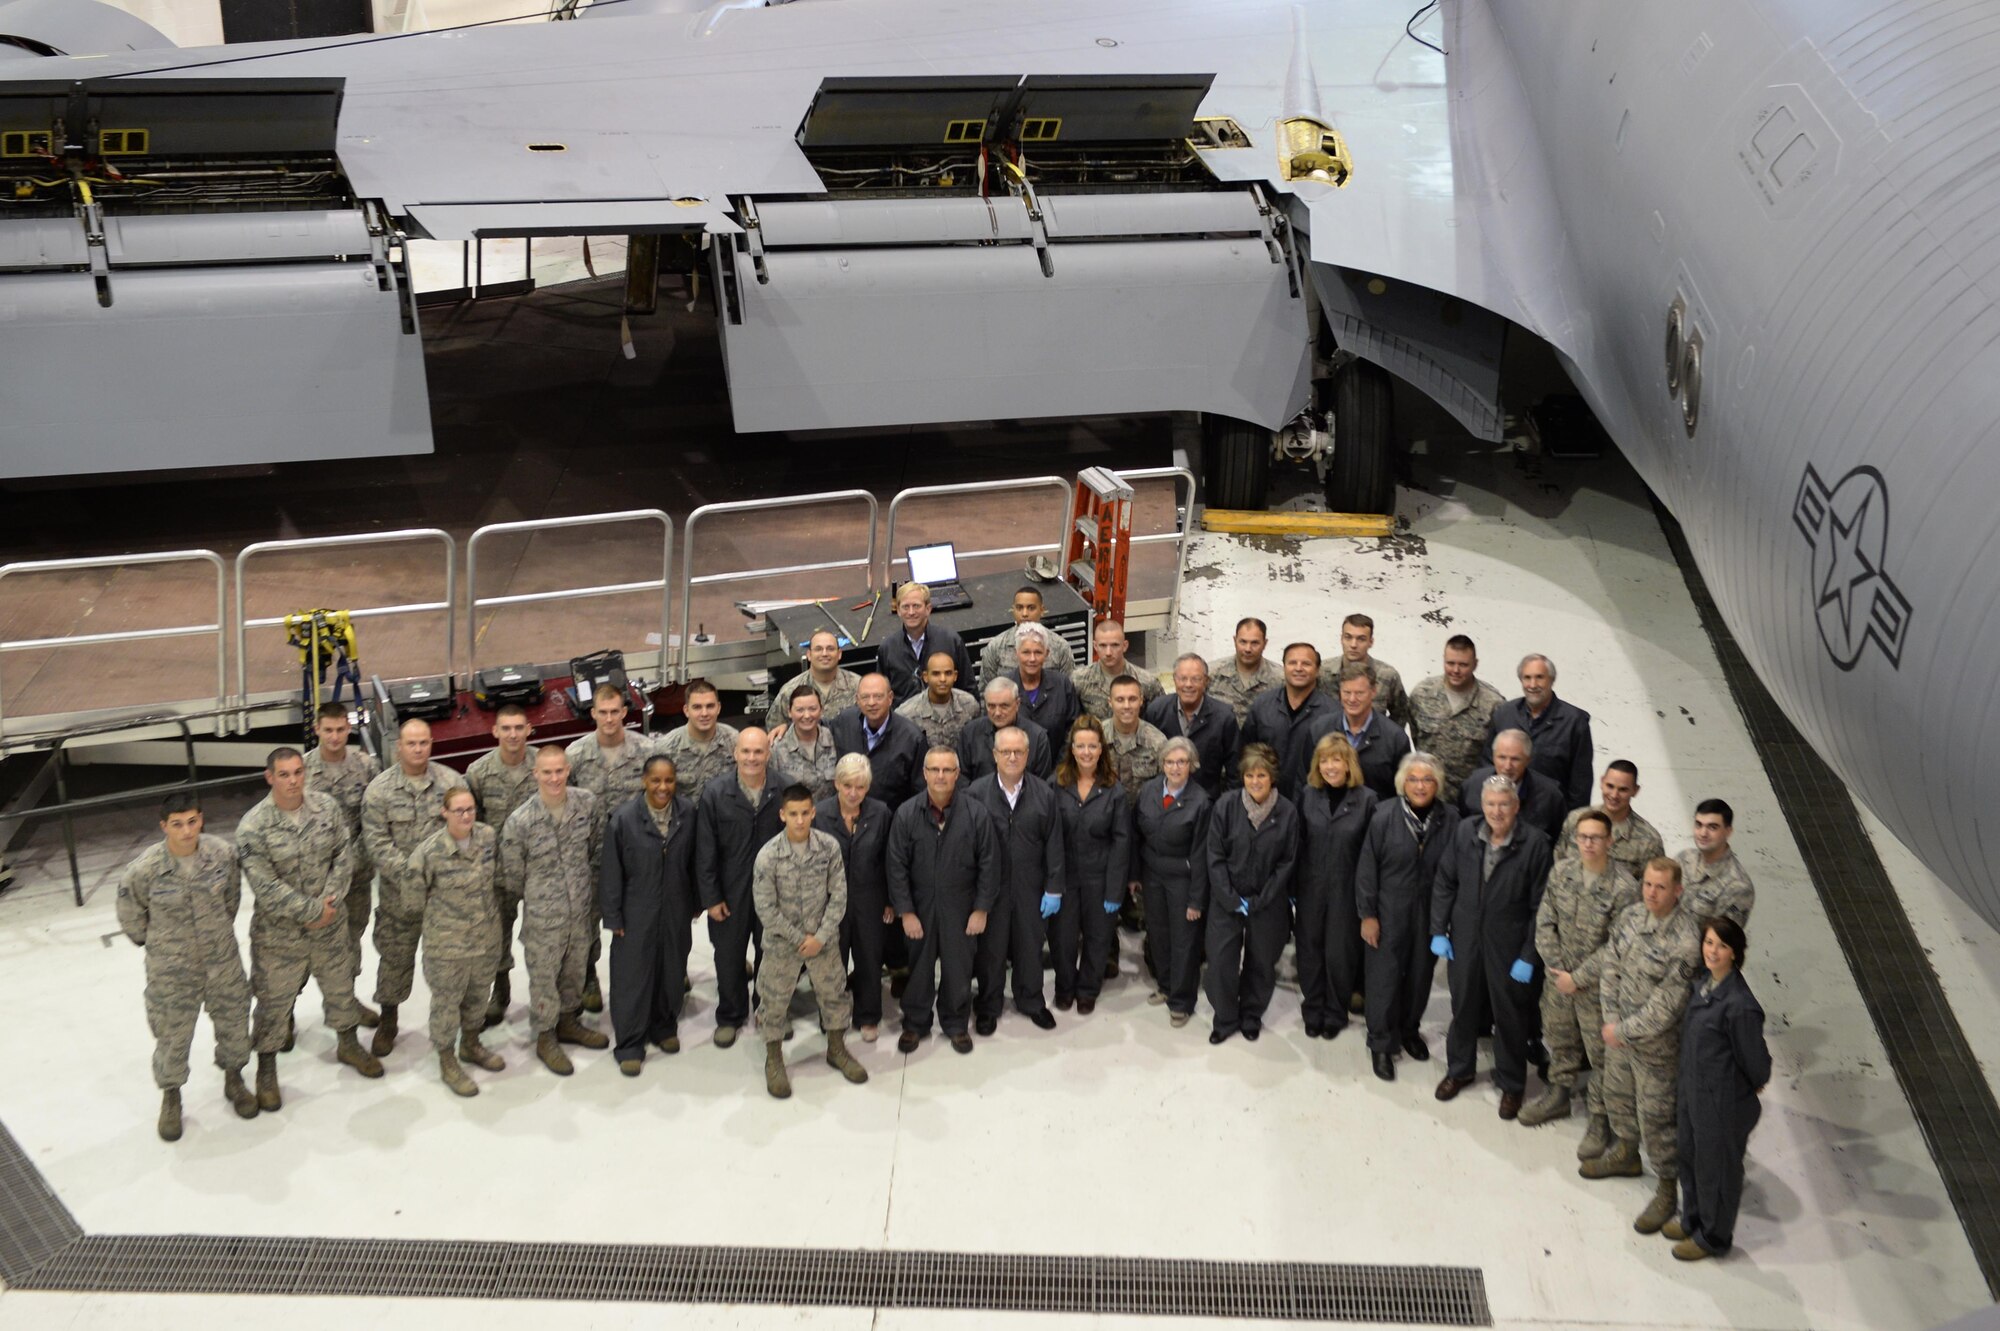 Air Mobility Command leadership and civic leaders pose with 22nd and 931st Maintenance Group Airmen next to a KC-135 Stratotanker, Nov. 17, 2015, at McConnell Air Force Base, Kan. Each civic leader was paired with an Airman who showed them first-hand what goes into maintaining a 60-year-old aircraft.  The event was part of a three-day AMC civic leader tour of McConnell in which attendees learned about the base’s current mission with the KC-135s and the future home of  the KC-46 Pegasus. (U.S Air Force photo/Senior Airman Colby Hardin)